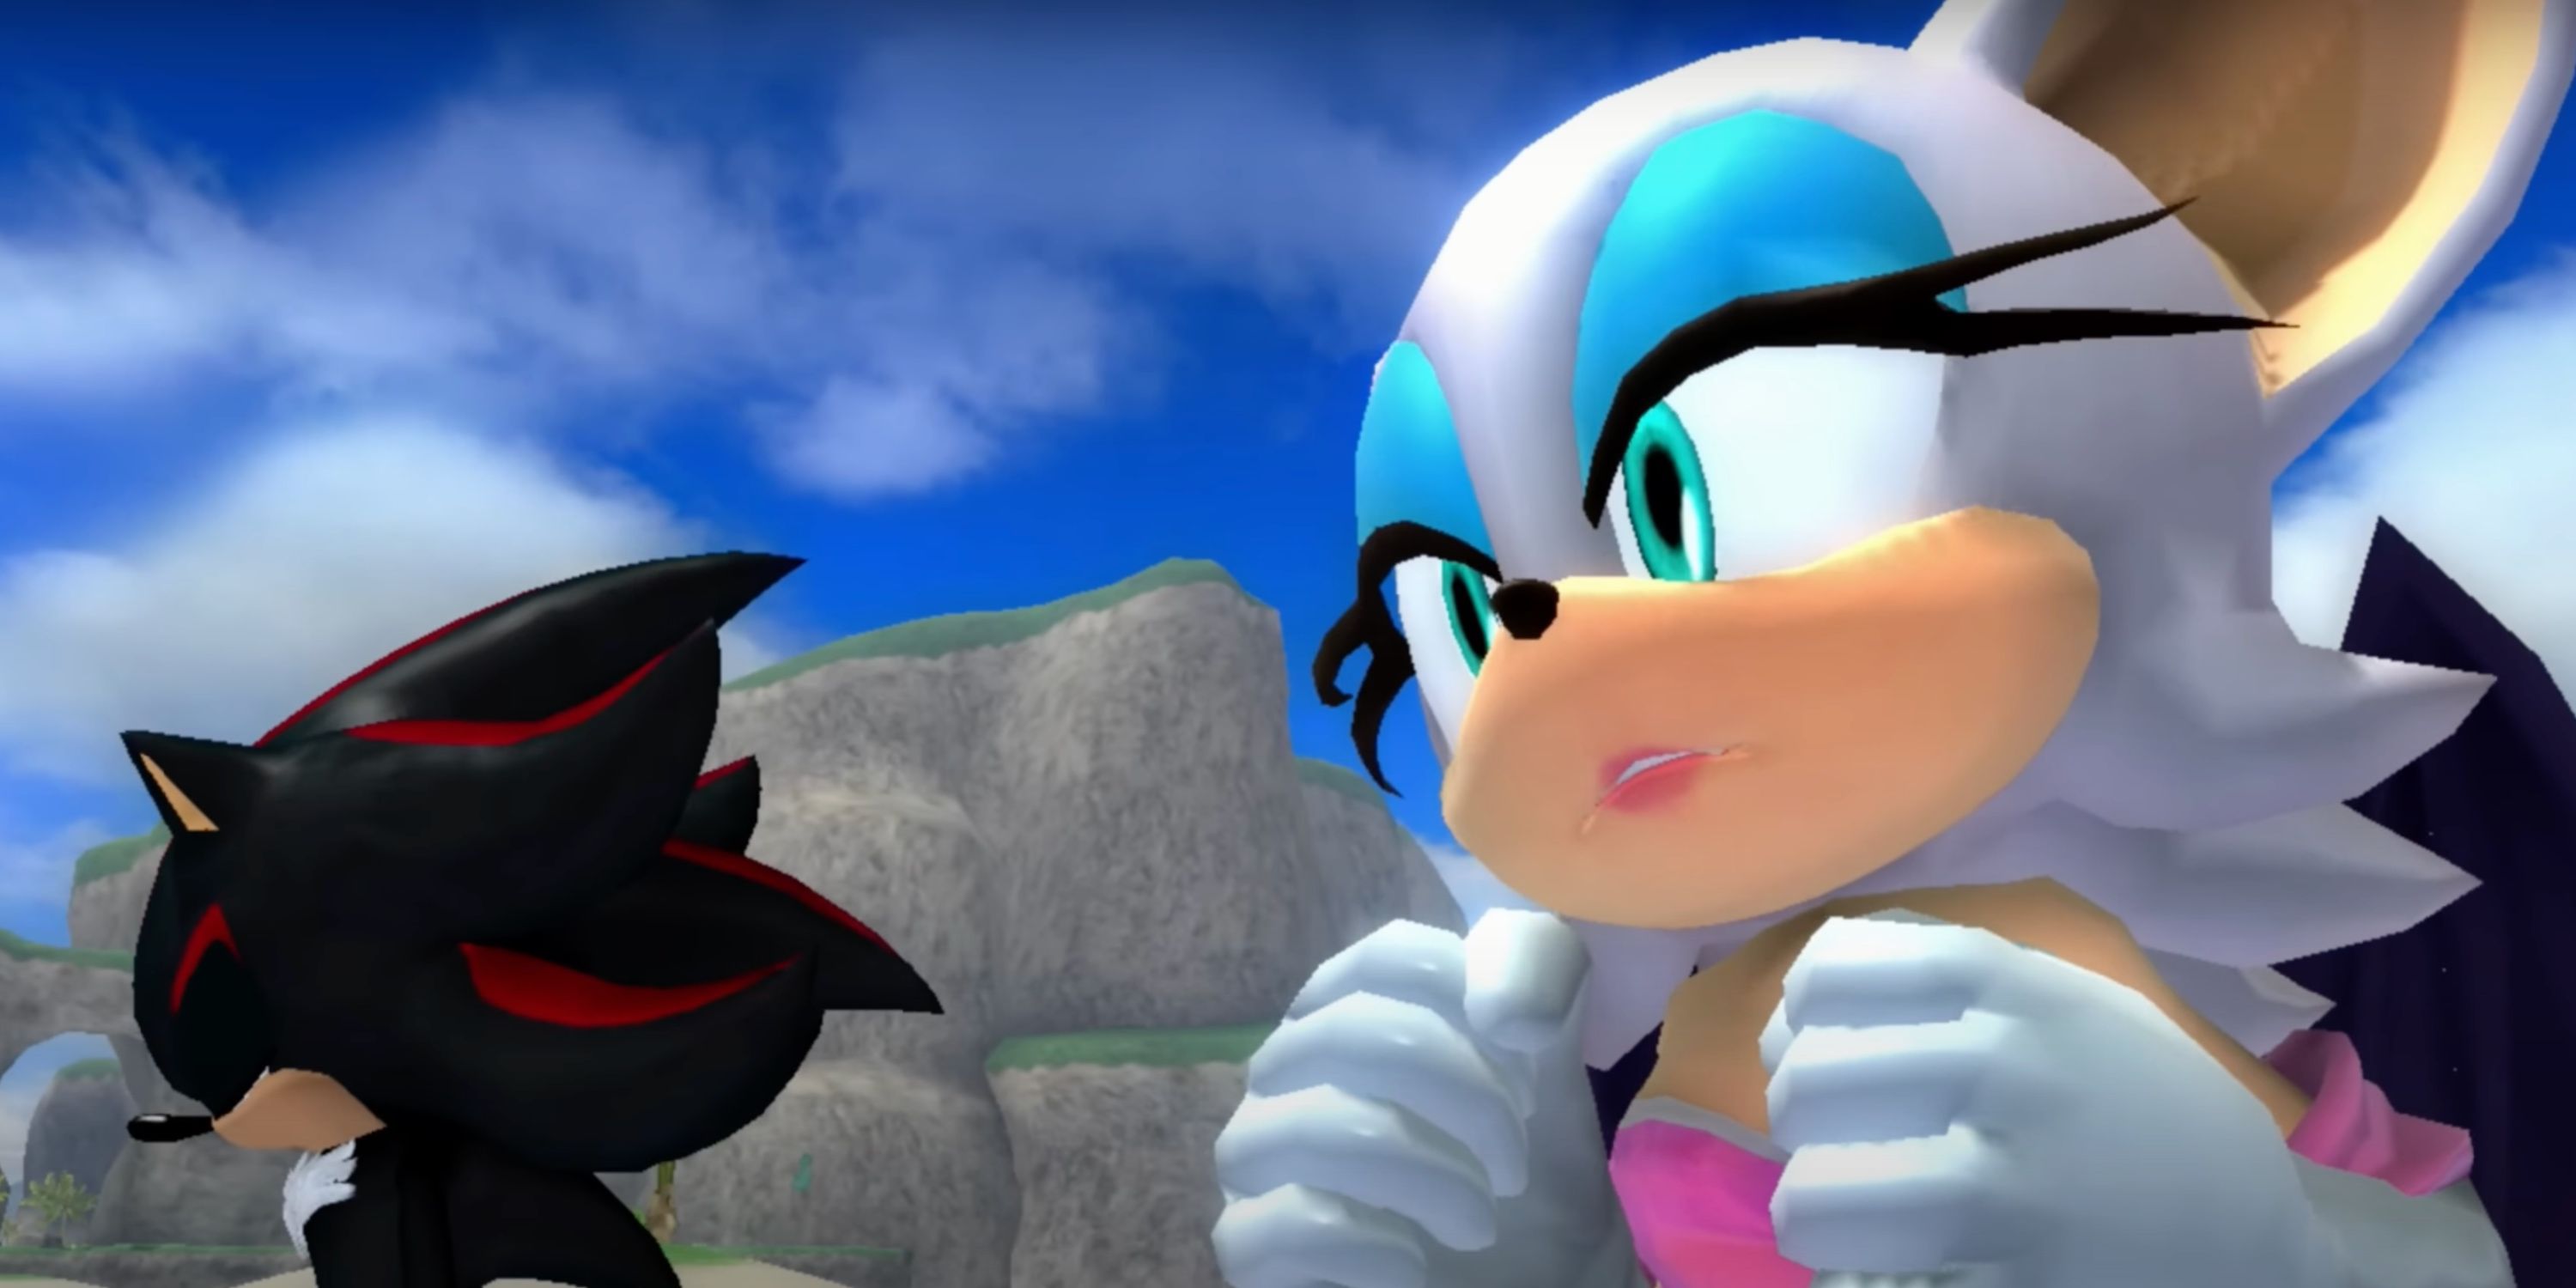 rouge in the foreground, with shadow next to her, his head down and eyes closed, from sonic 06